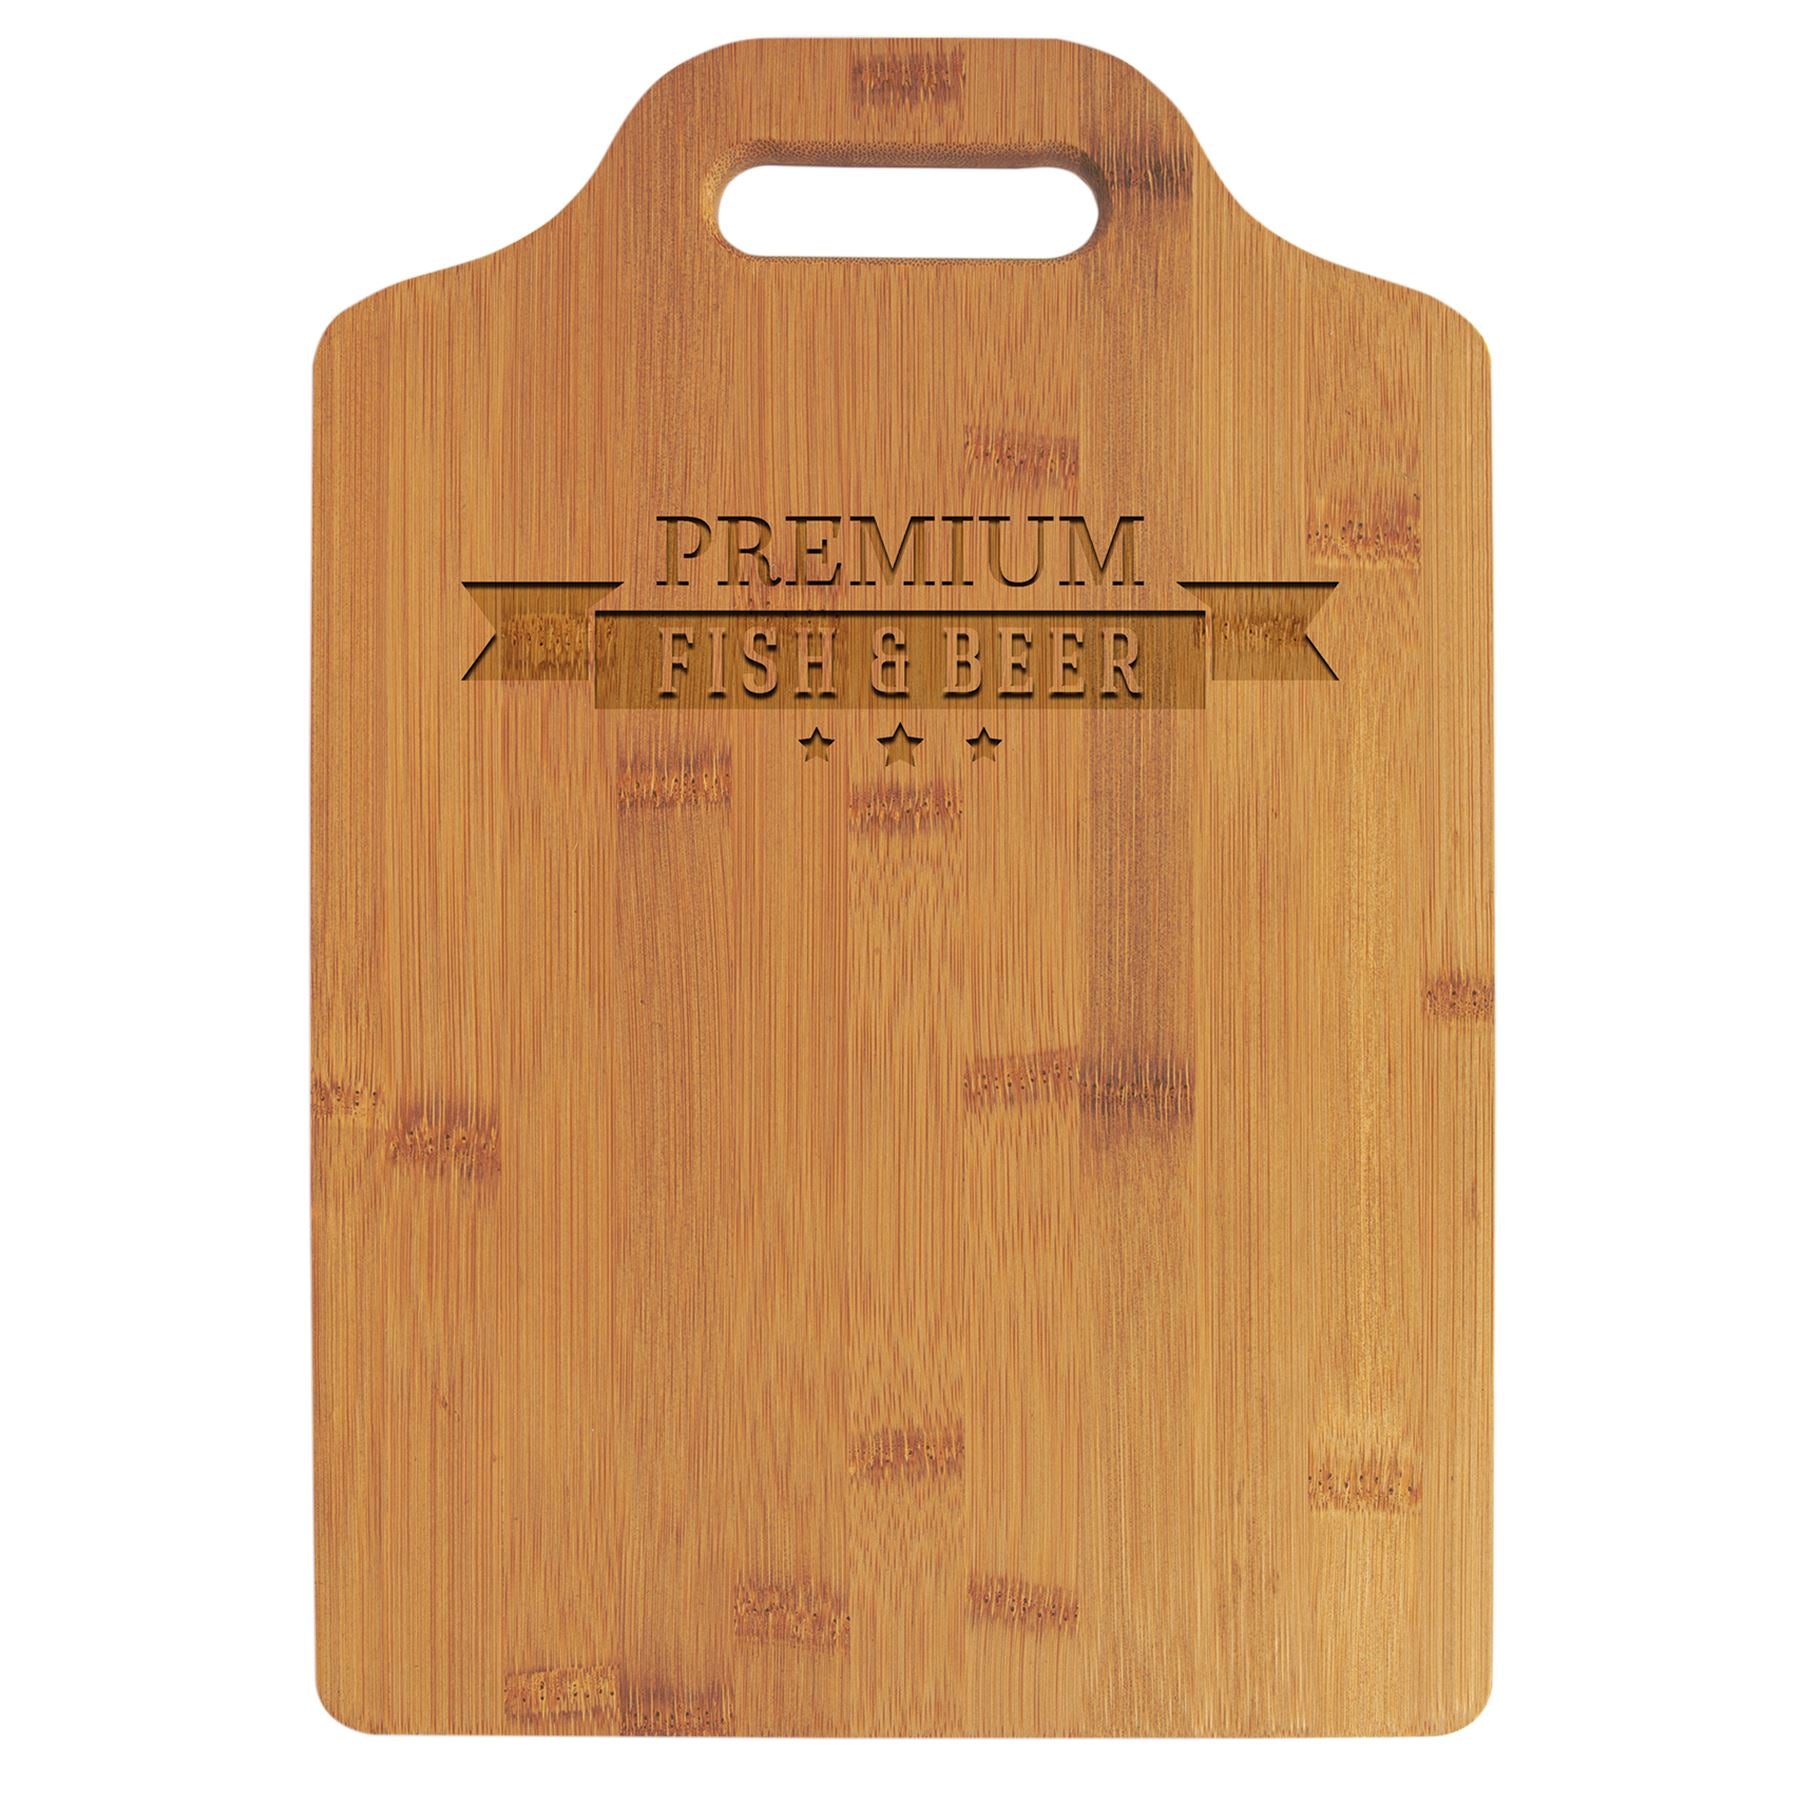 Cutting Board with Handle, Bamboo, 13" x 9", Laser Engraved Cutting Board Craftworks NW 